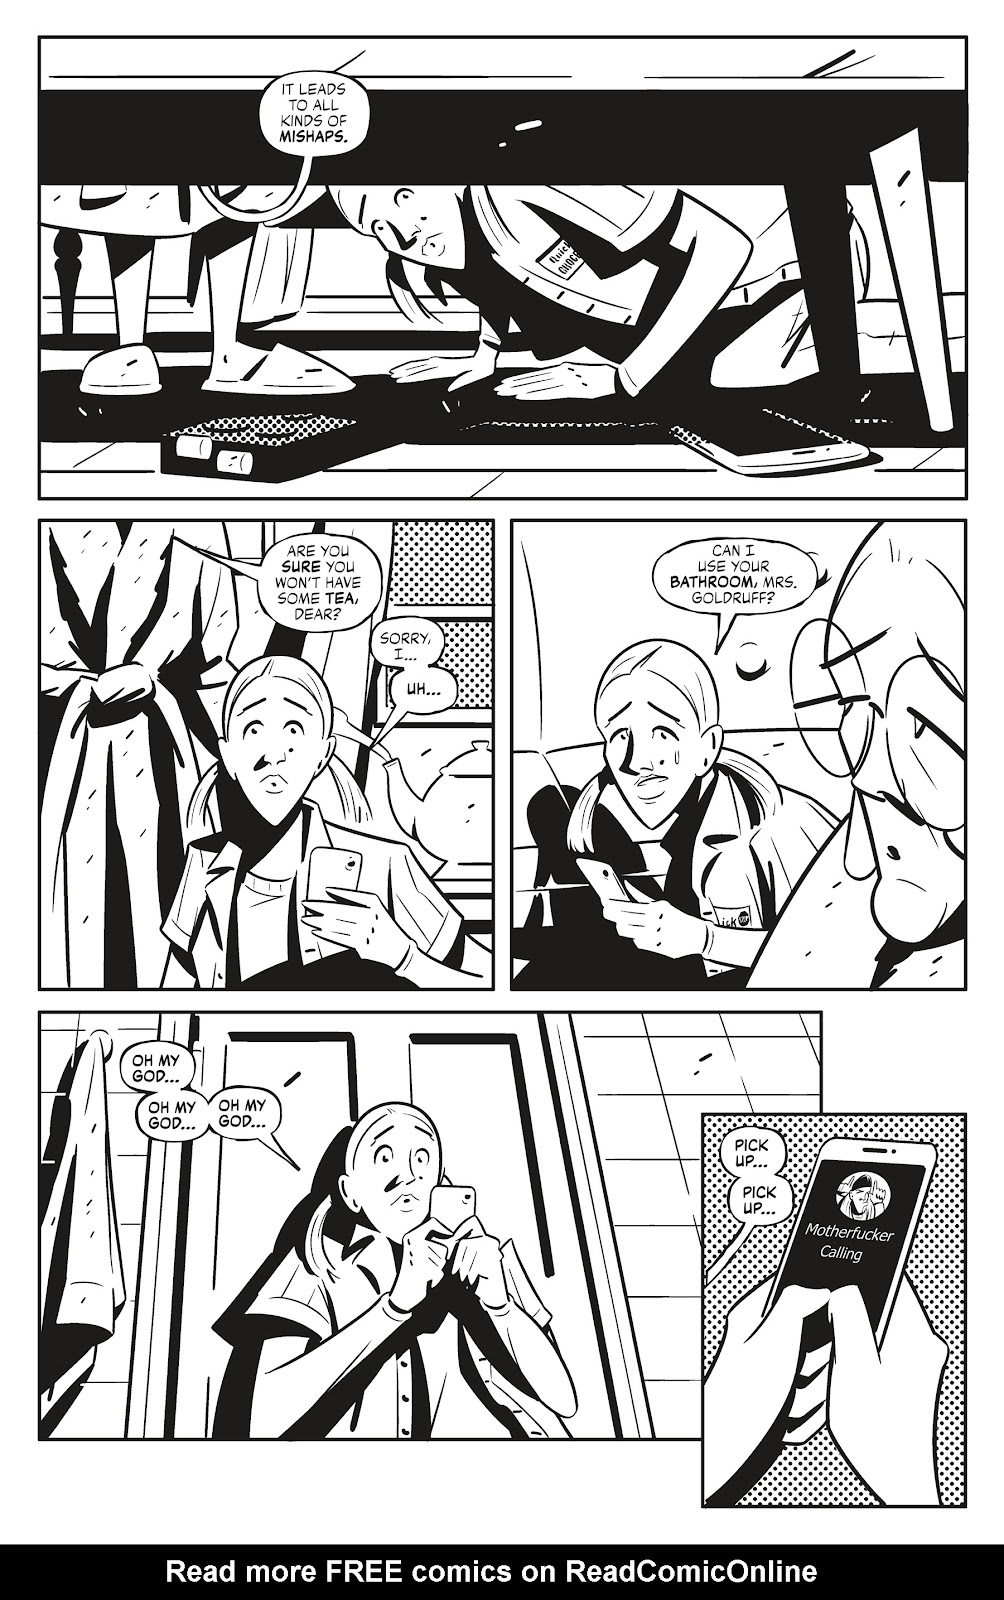 Quick Stops Vol. 2 issue 4 - Page 8